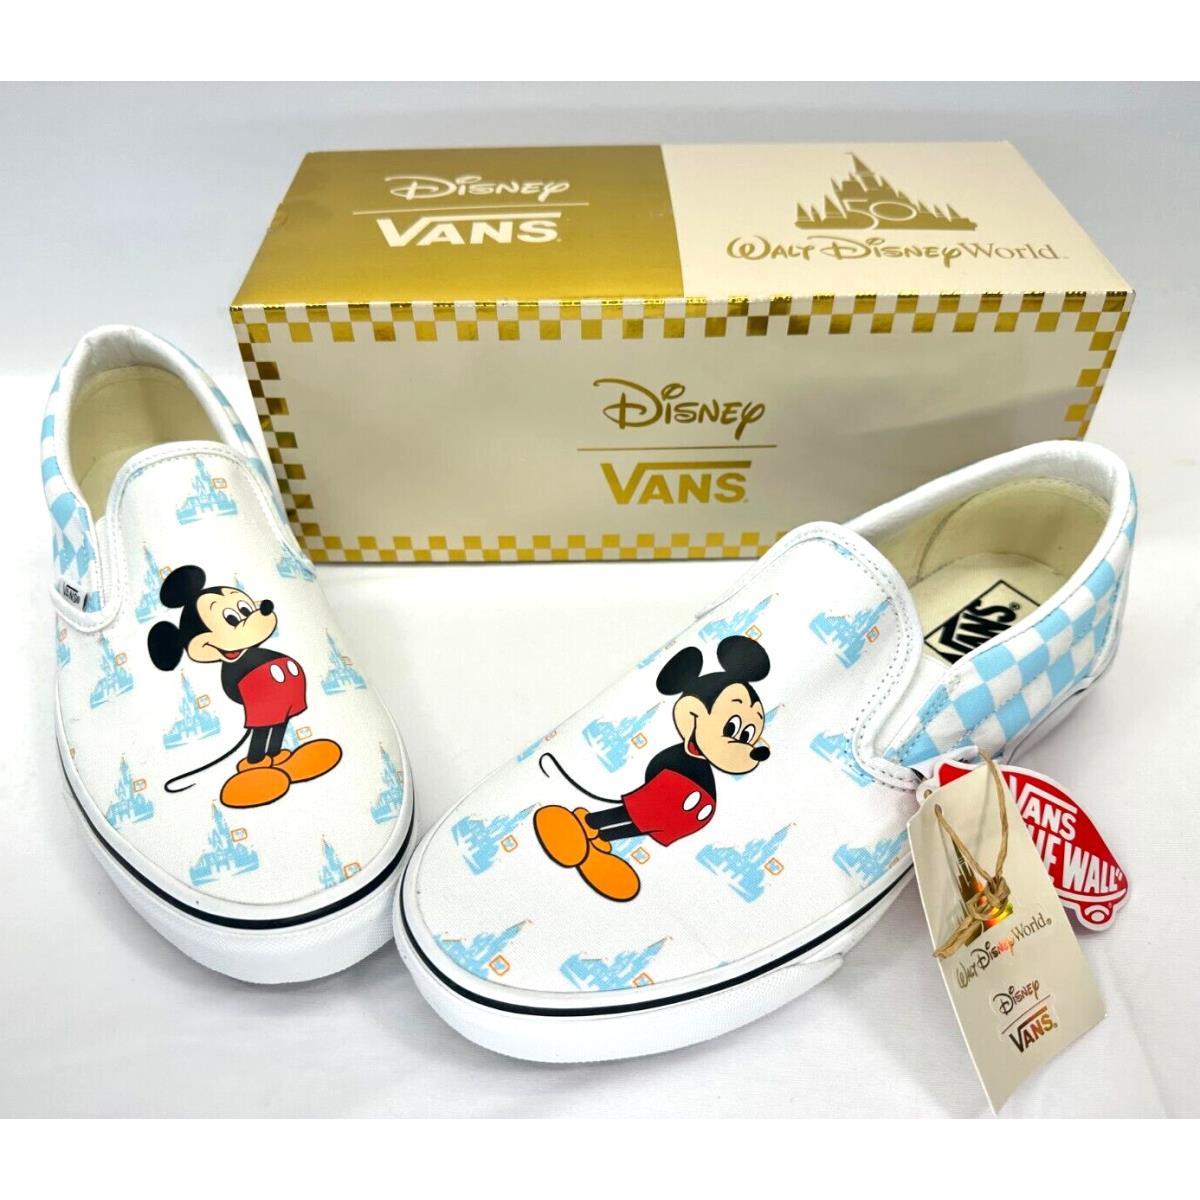 Disney World 50TH Anniversary Vans Slip on Sneaker Shoes M/9 W/10.5 Mickey Mouse